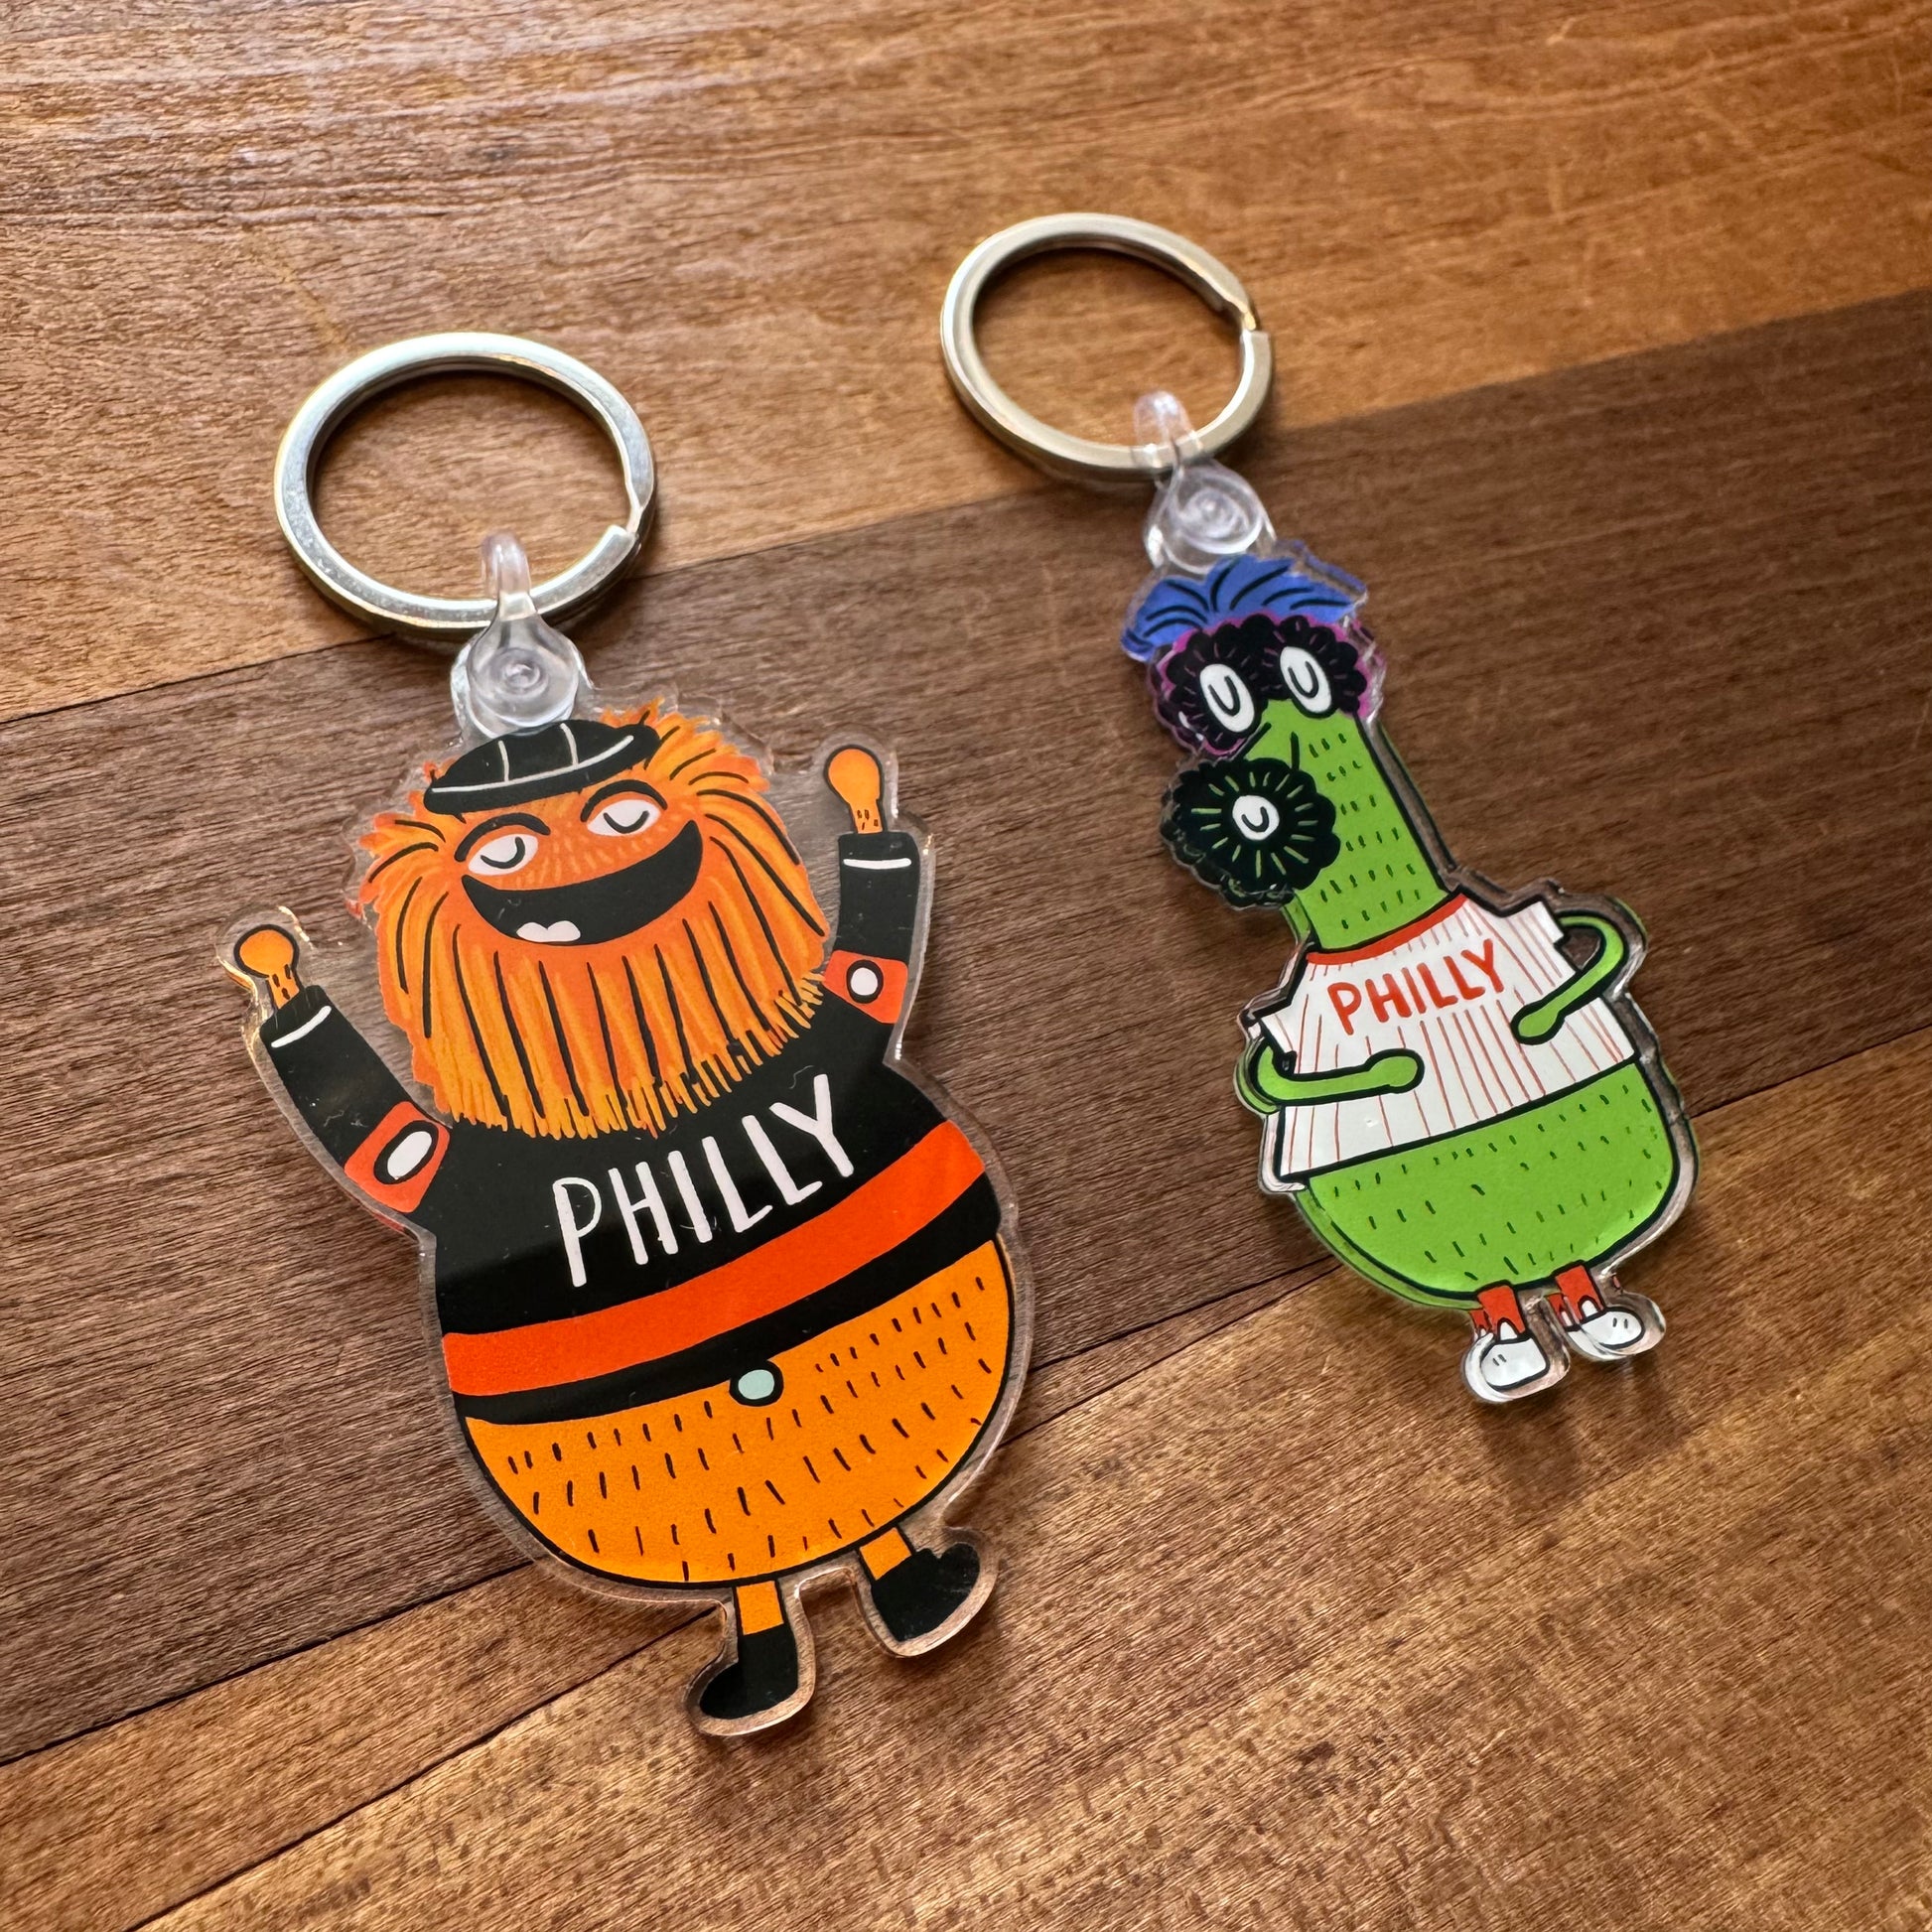 Two *Gritty & Phanatic Keychains* by *Ana Thorne* are on a wooden surface. One is an orange and black Gritty keychain sporting "PHILLY" on its shirt; the other is a green Phanatic keychain, wearing glasses and holding a "PHILLY" sign.